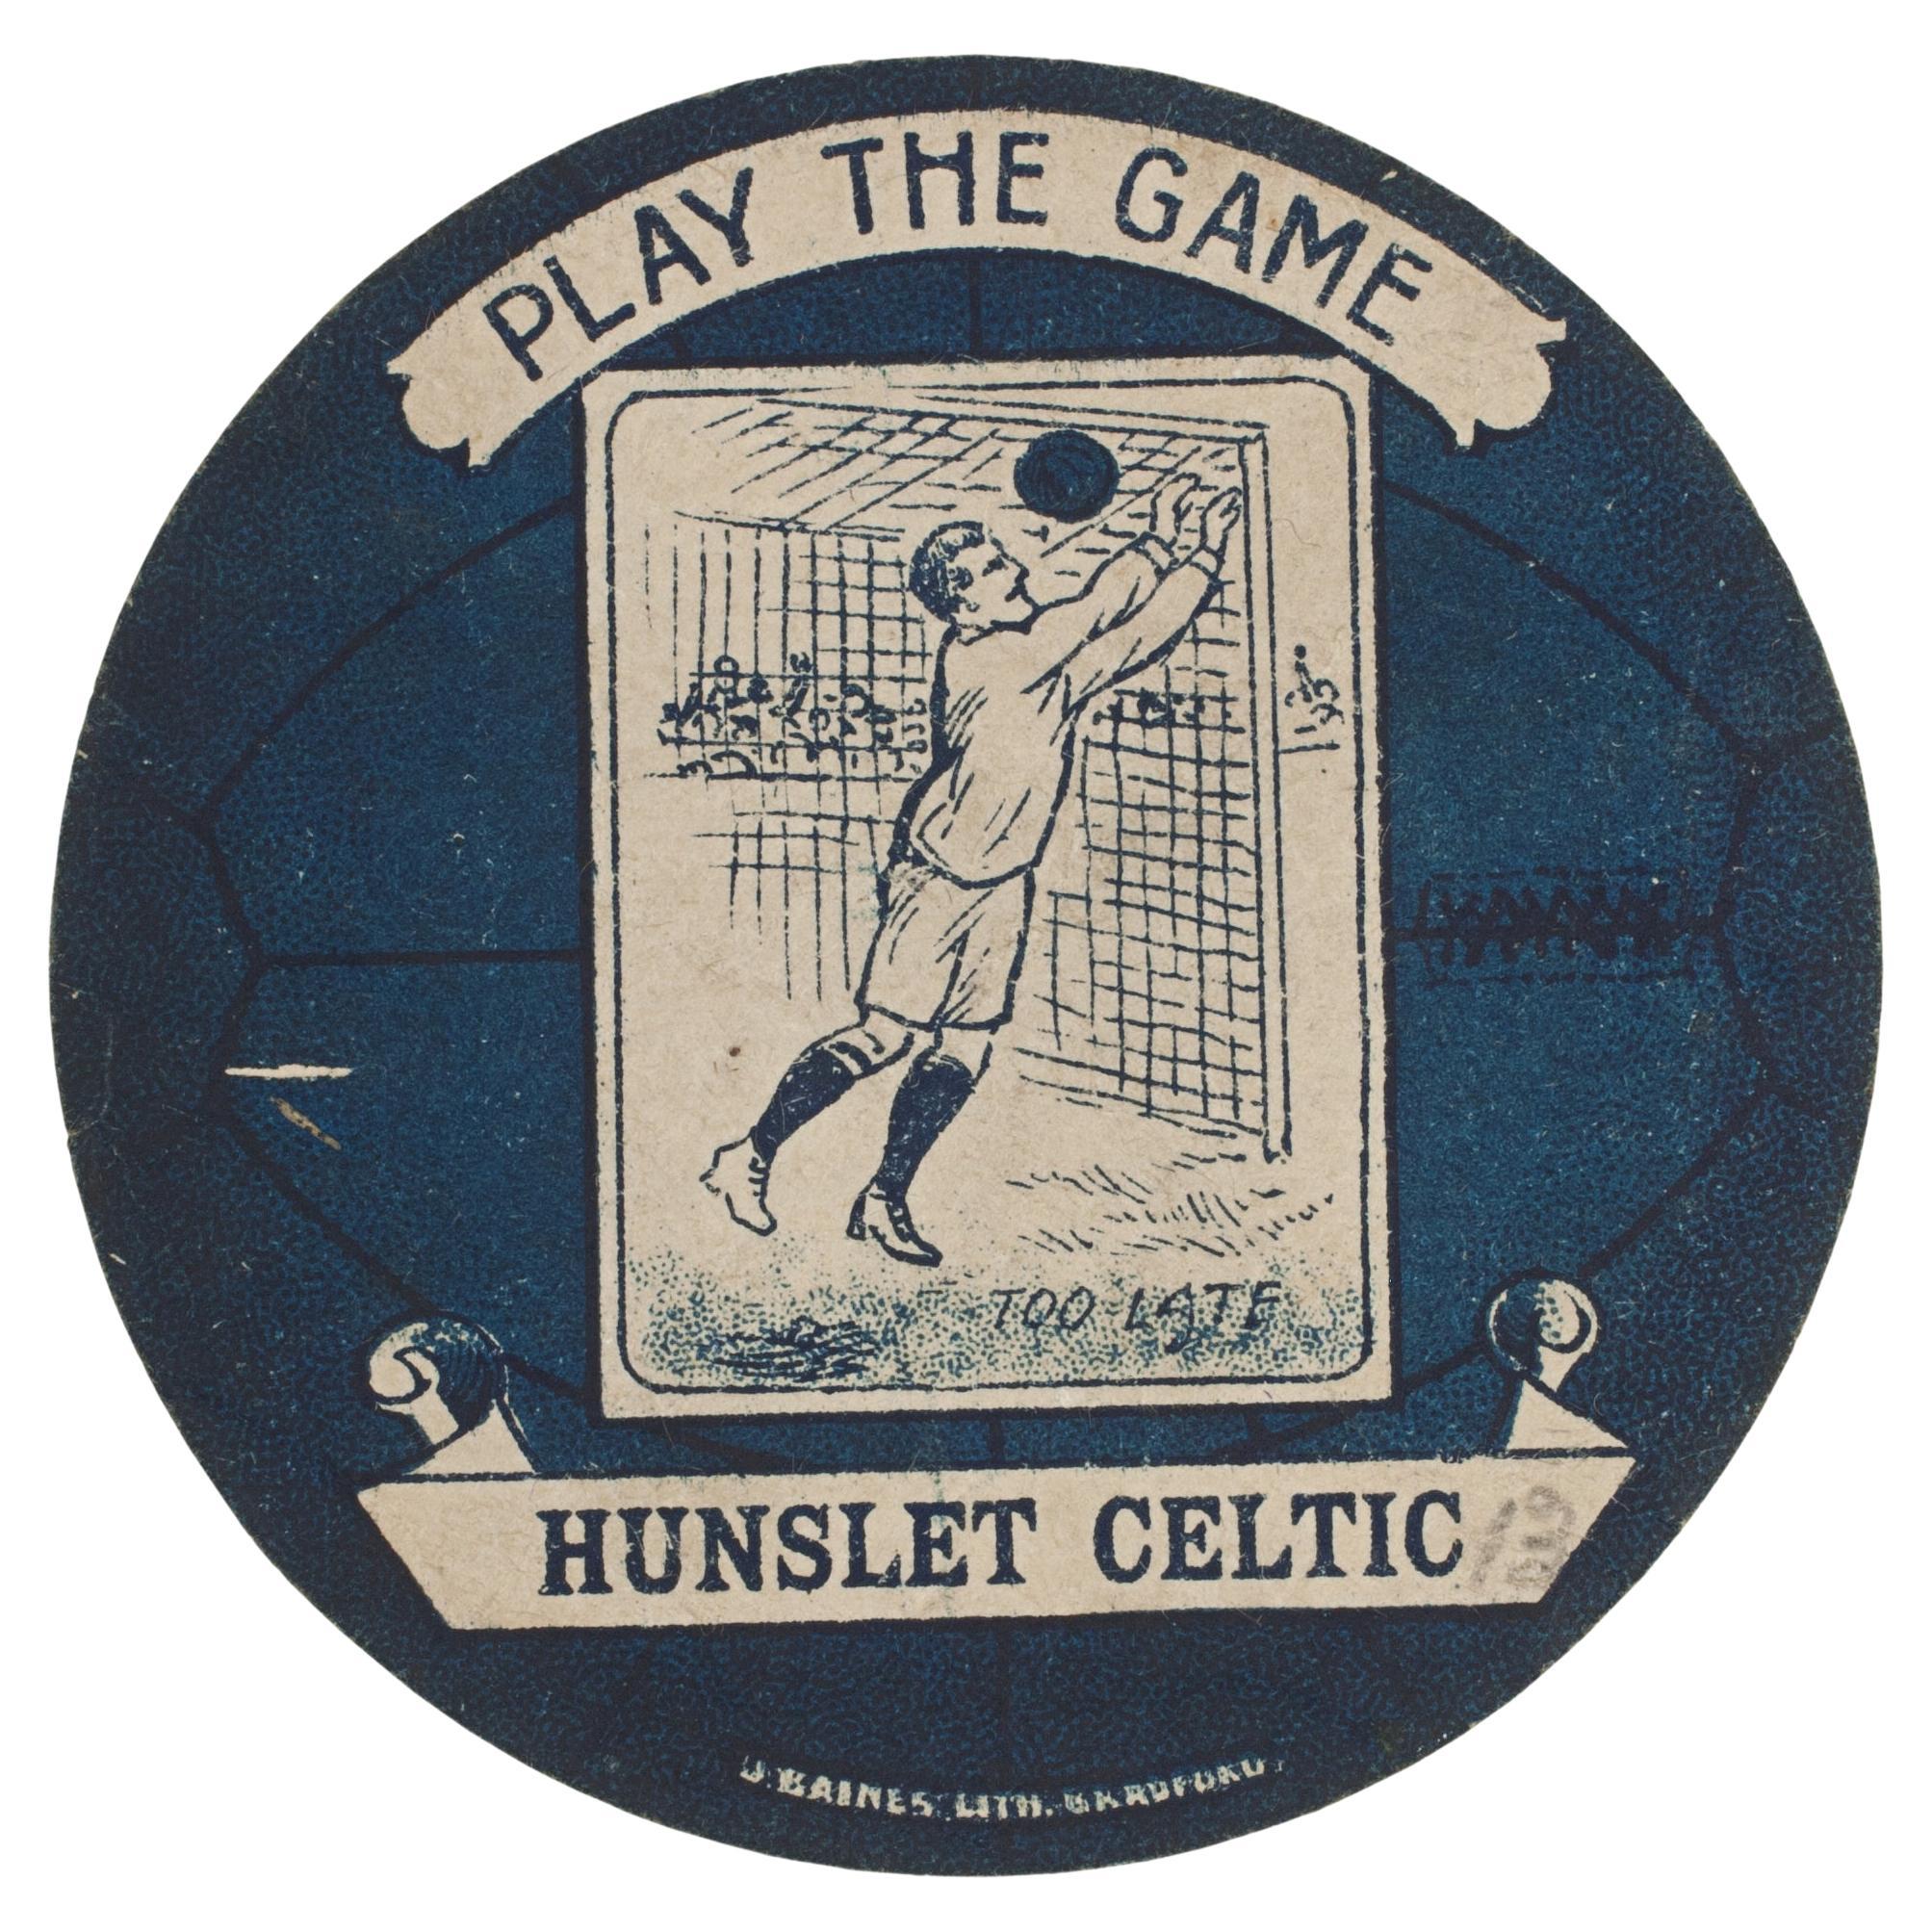 Baines Football Trade Card, Hunslet Celtic, Play The Game